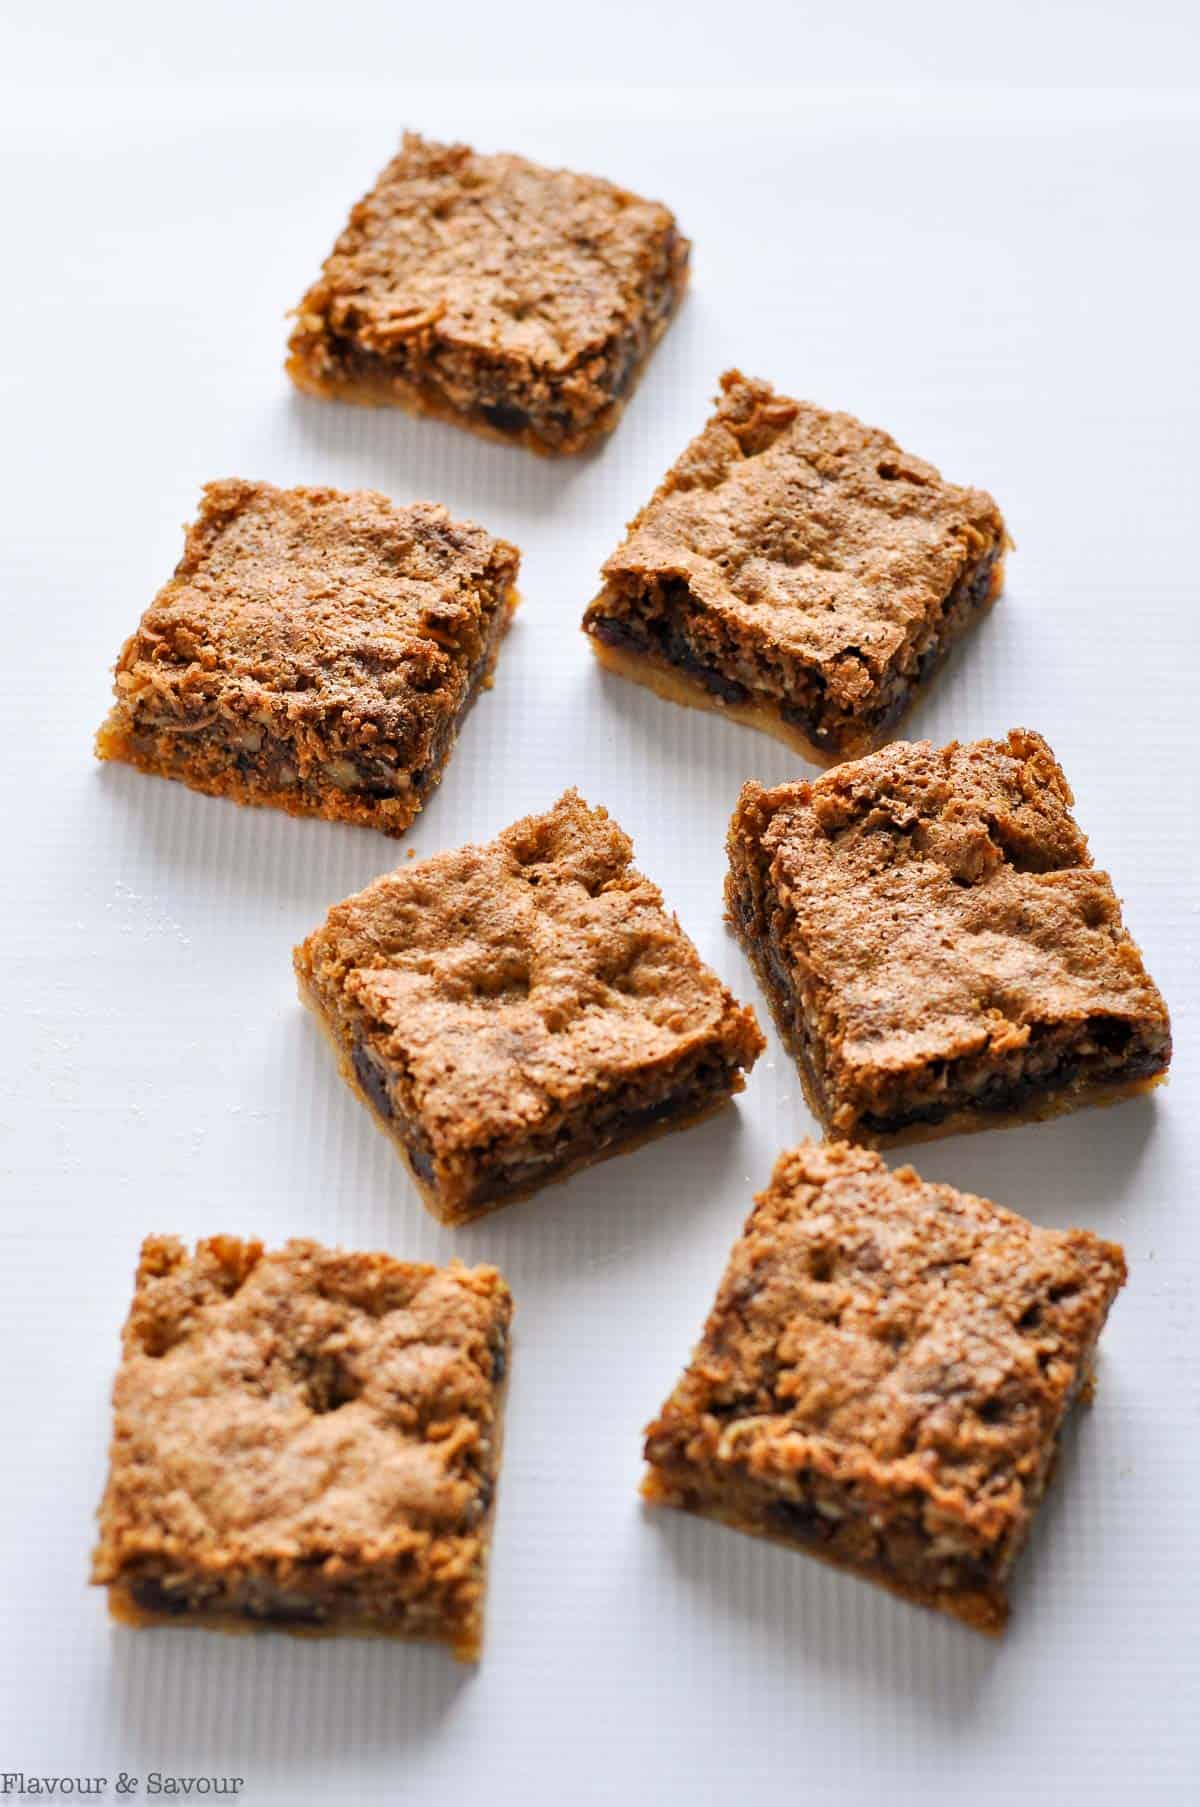 6 gluten-free butter tart squares on a white background.